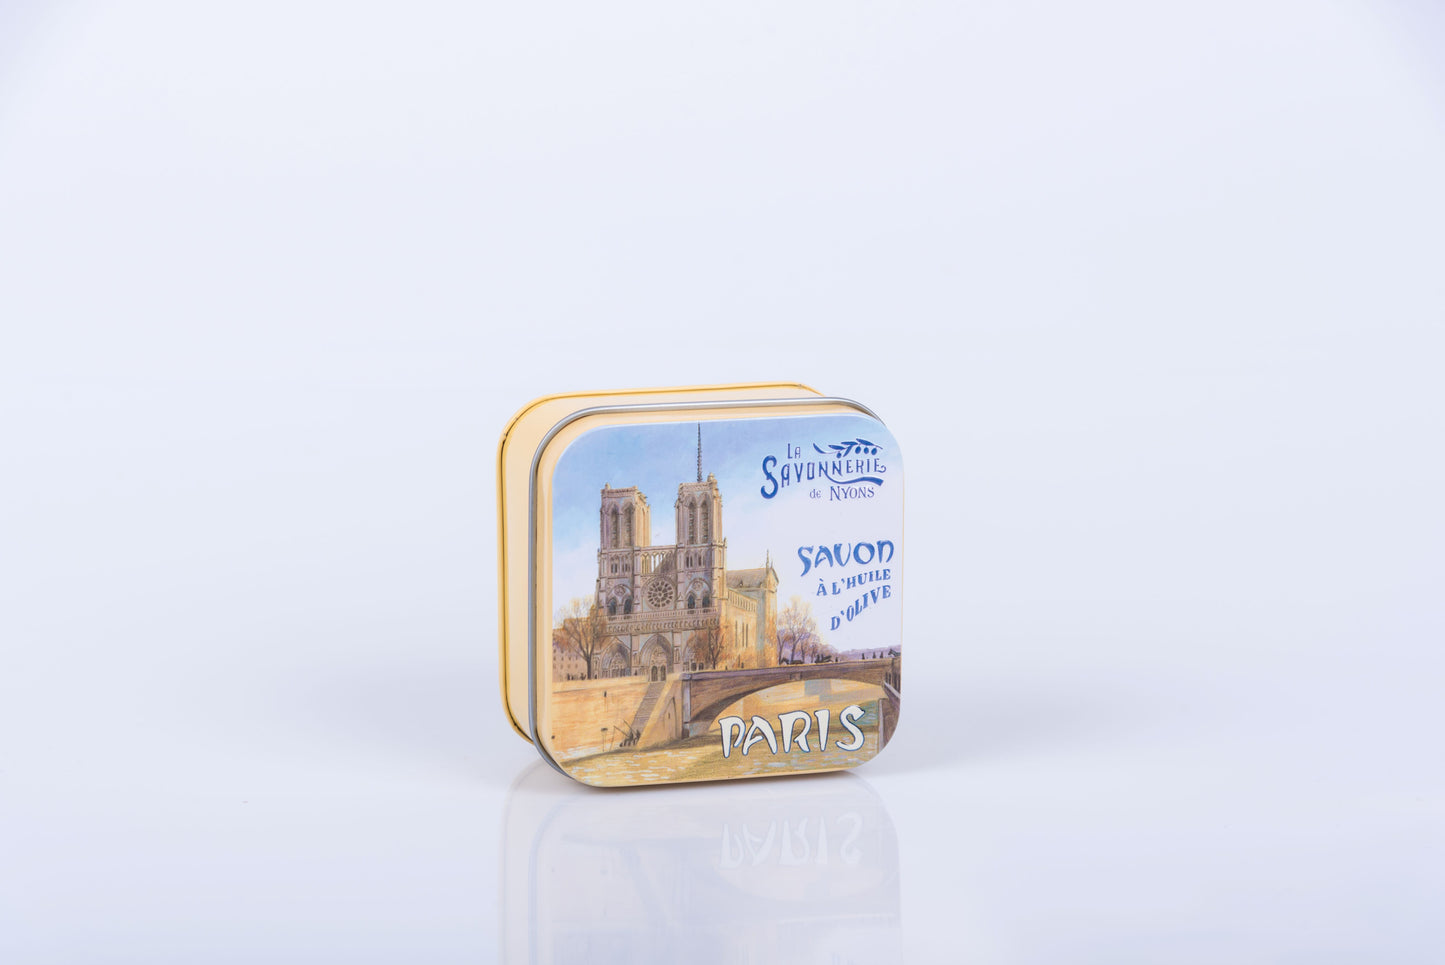 May Rose Soap In "Notre Dame" Tin Box 3.5 oz